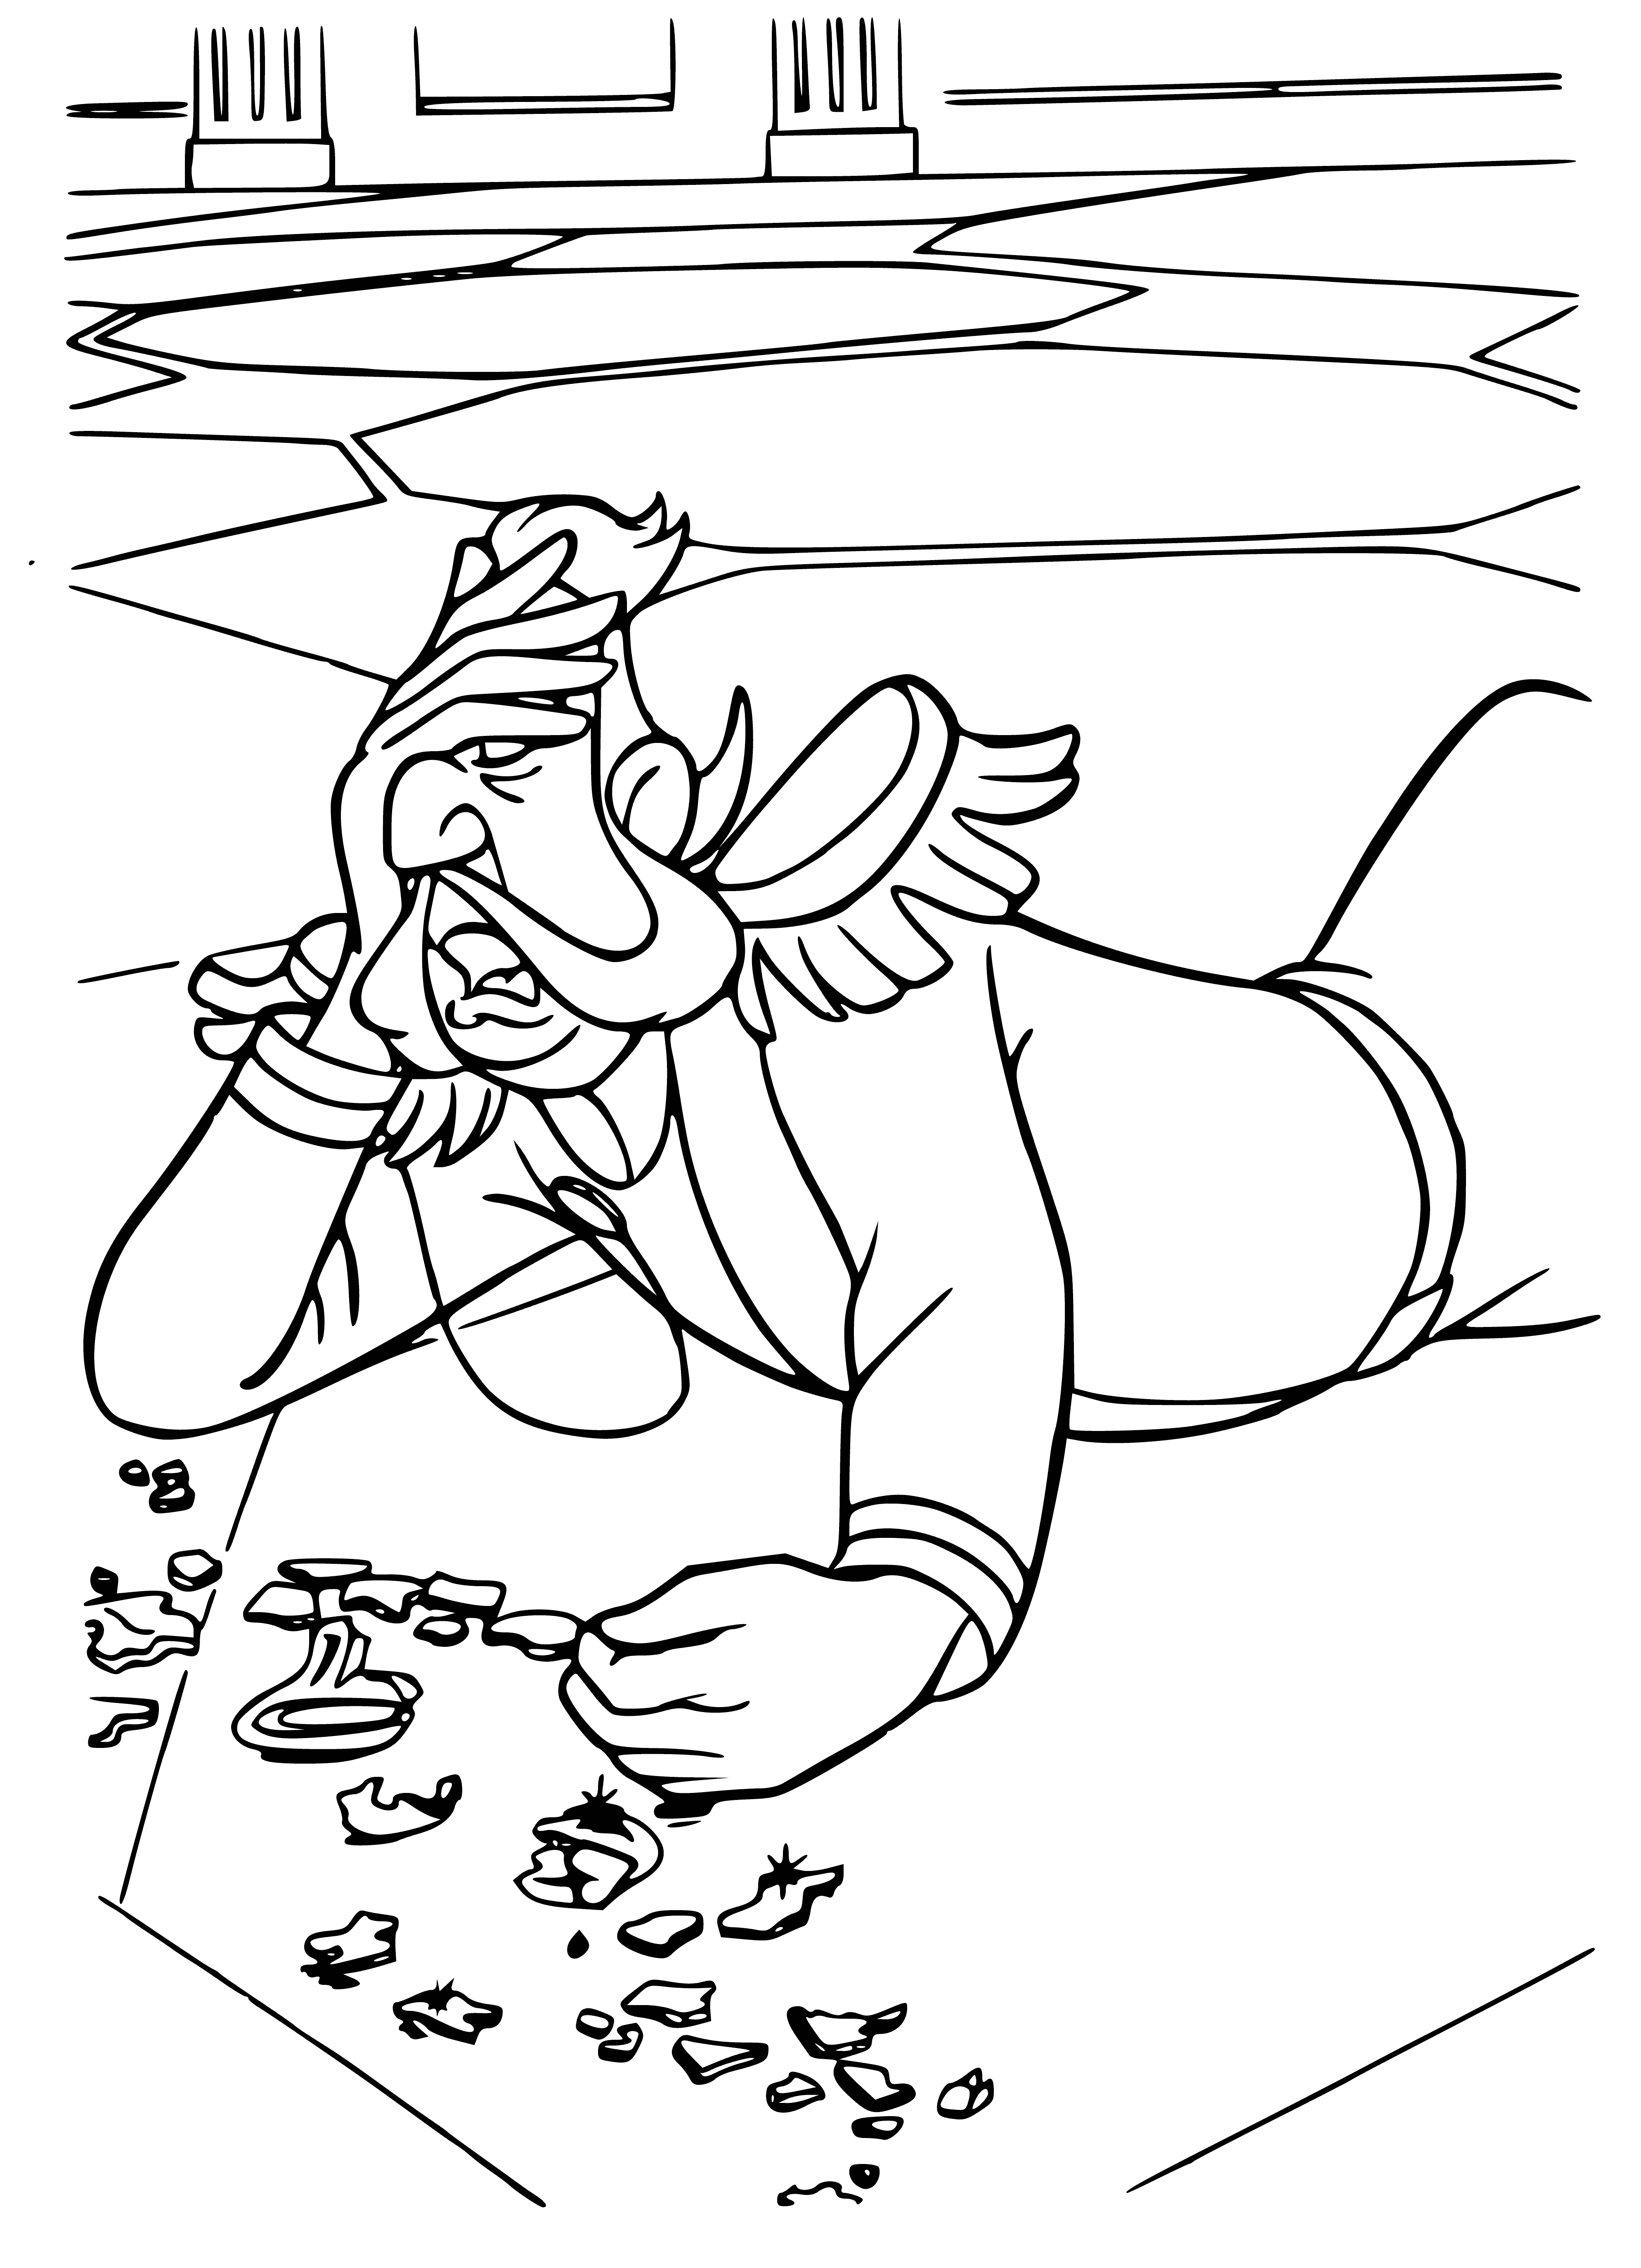 The slipper crashed coloring page